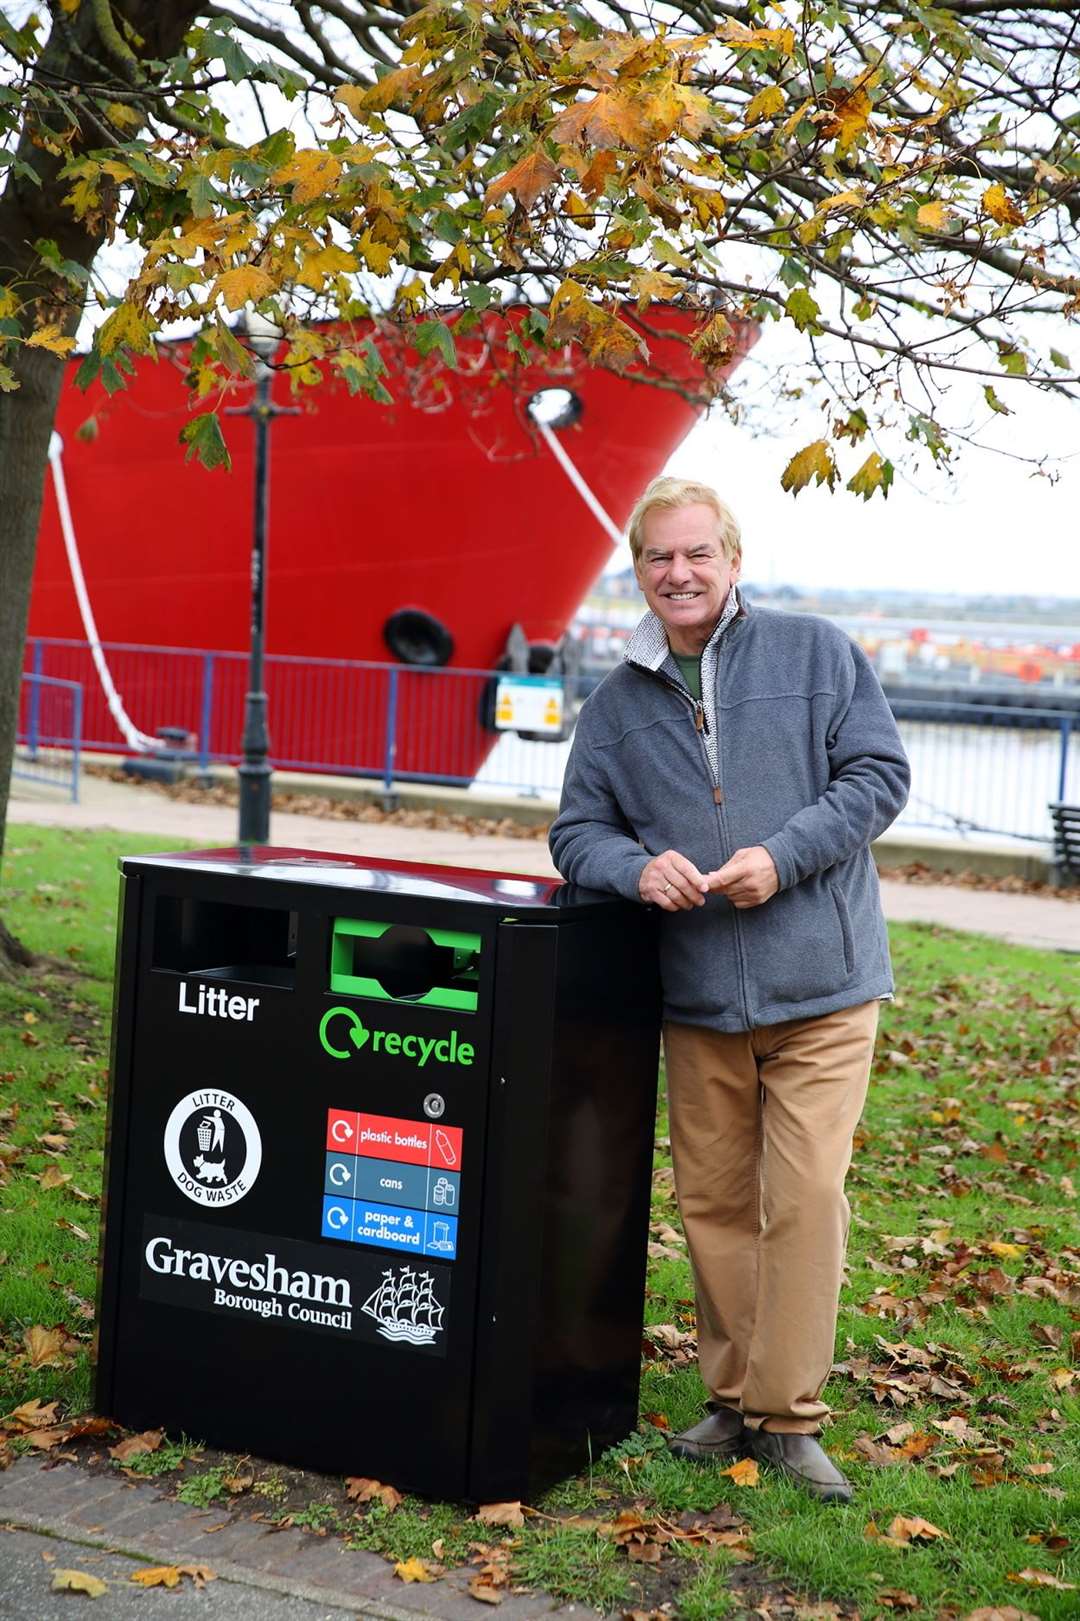 Cllr Lee Croxton with one of the new recycling on the go bins in Gravesend